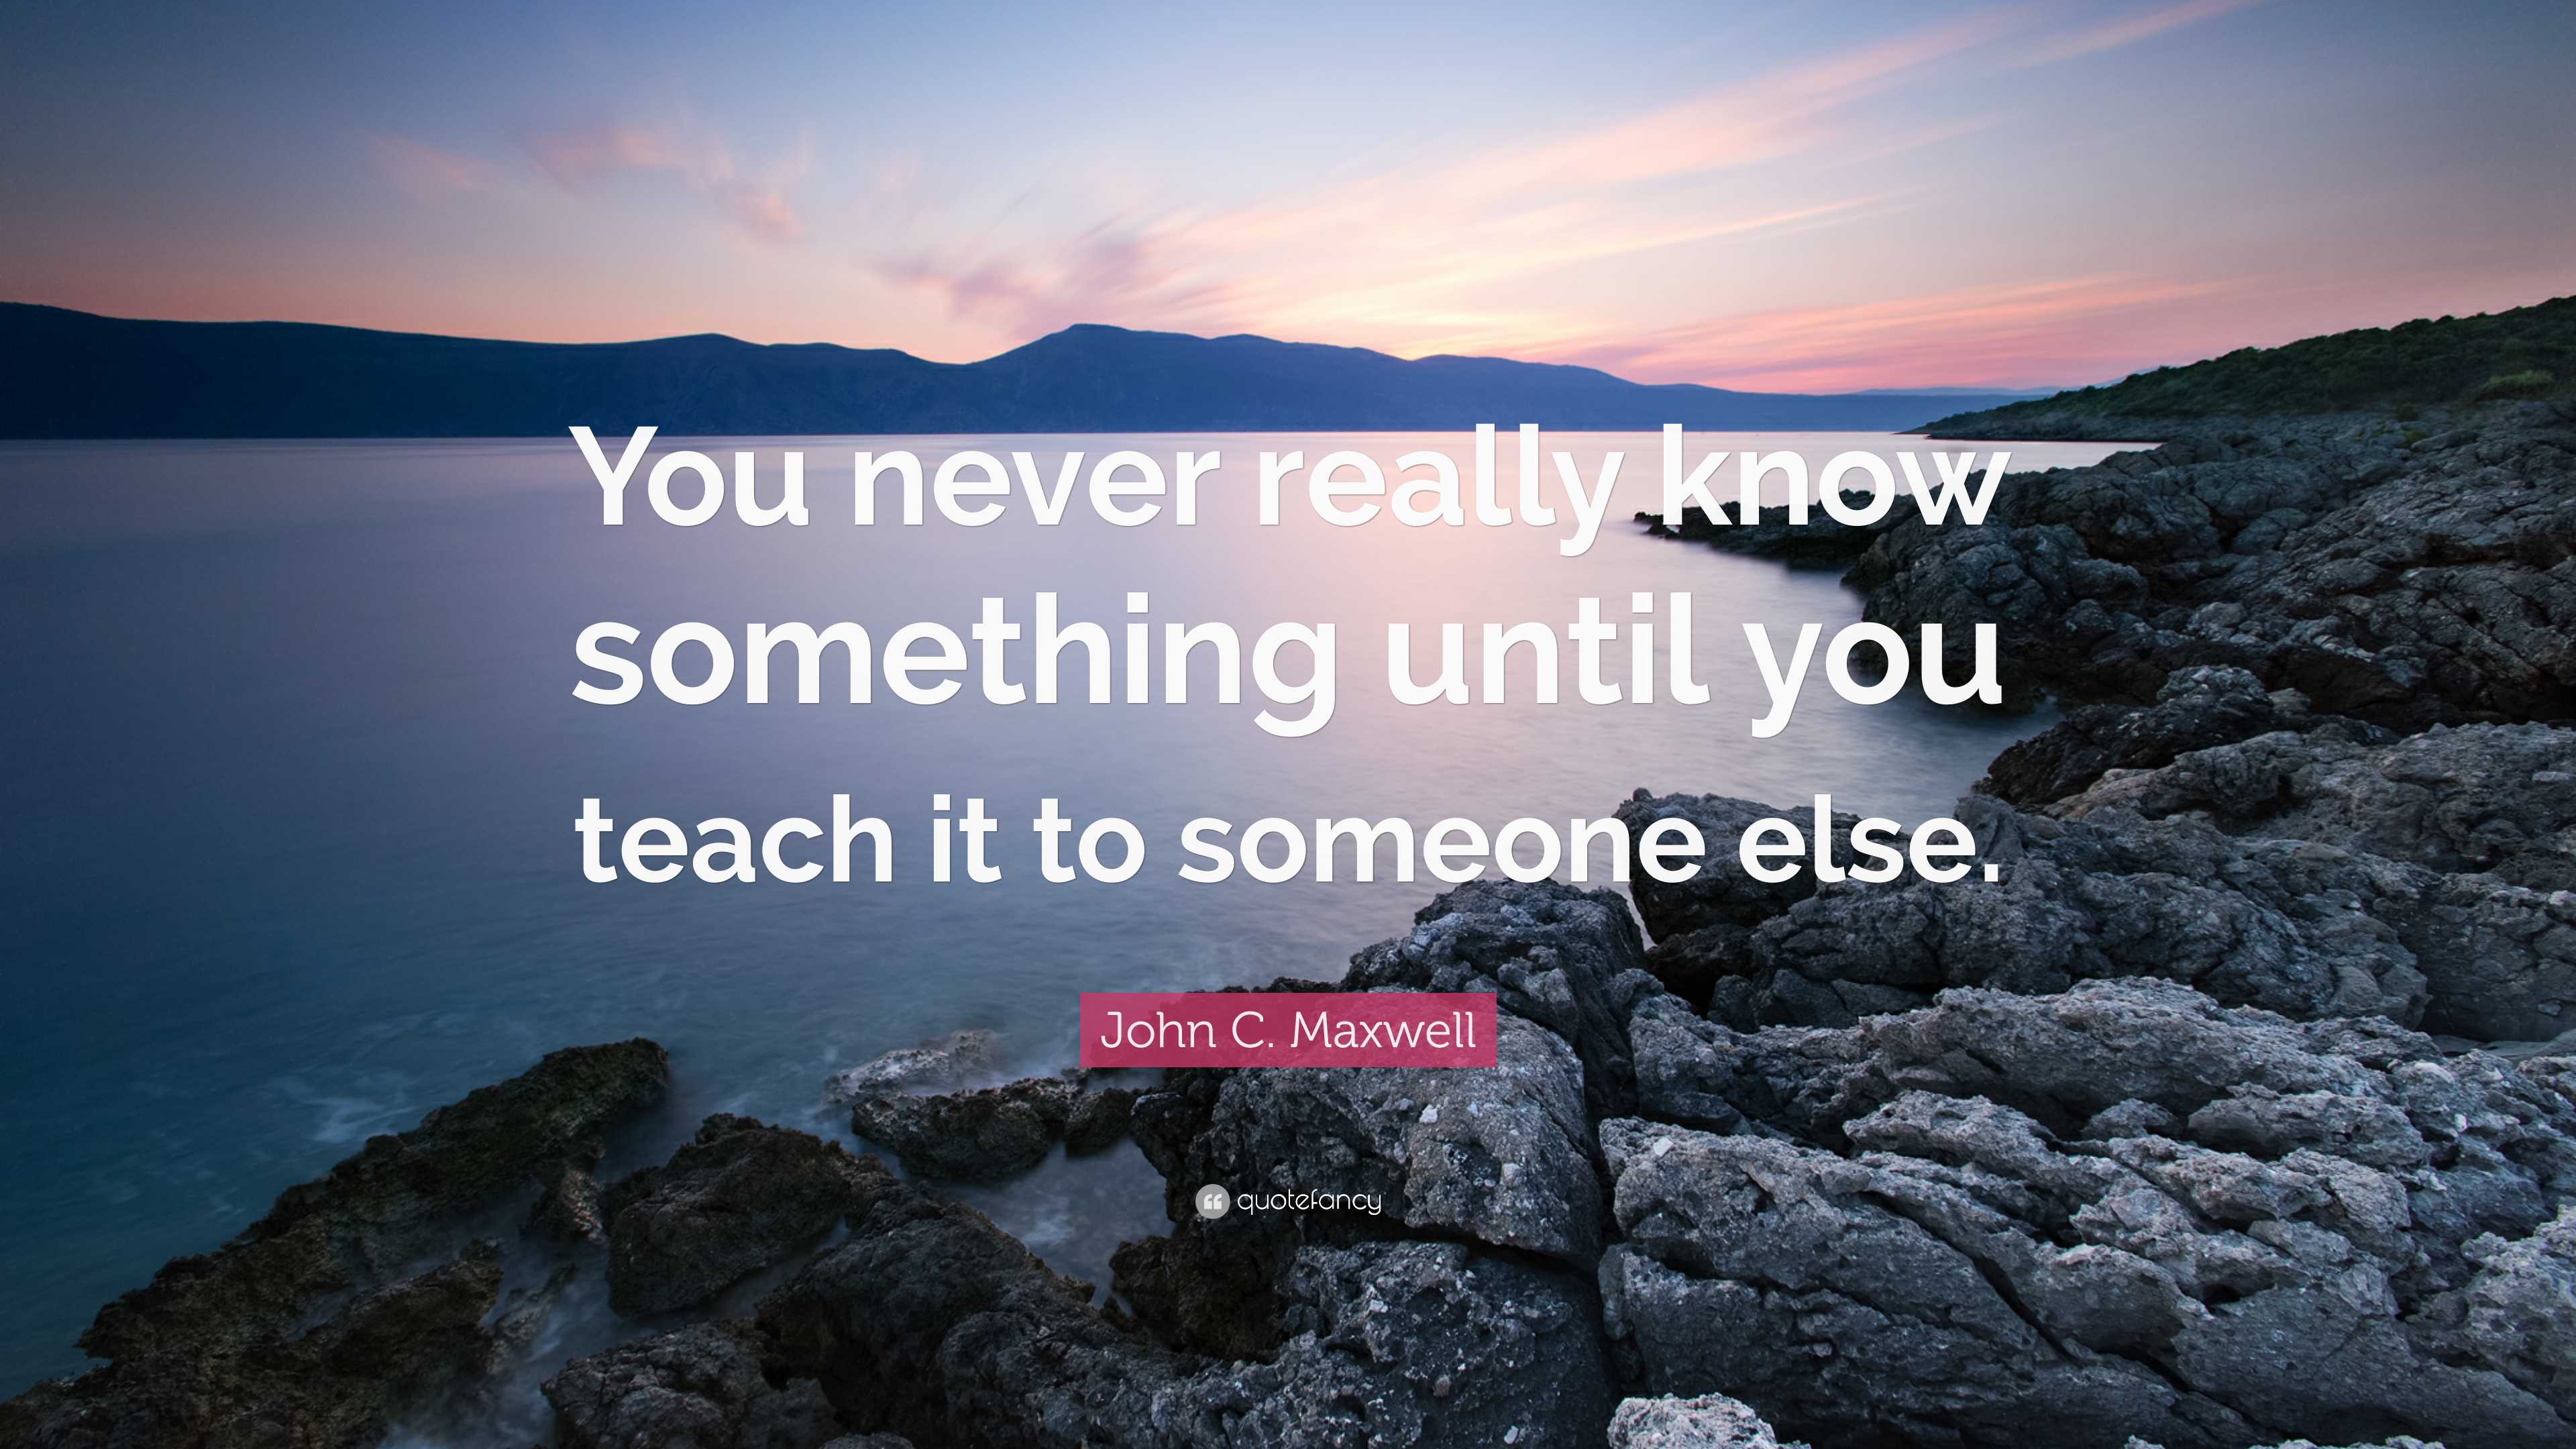 John C. Maxwell Quote: “You never really know something until you teach ...